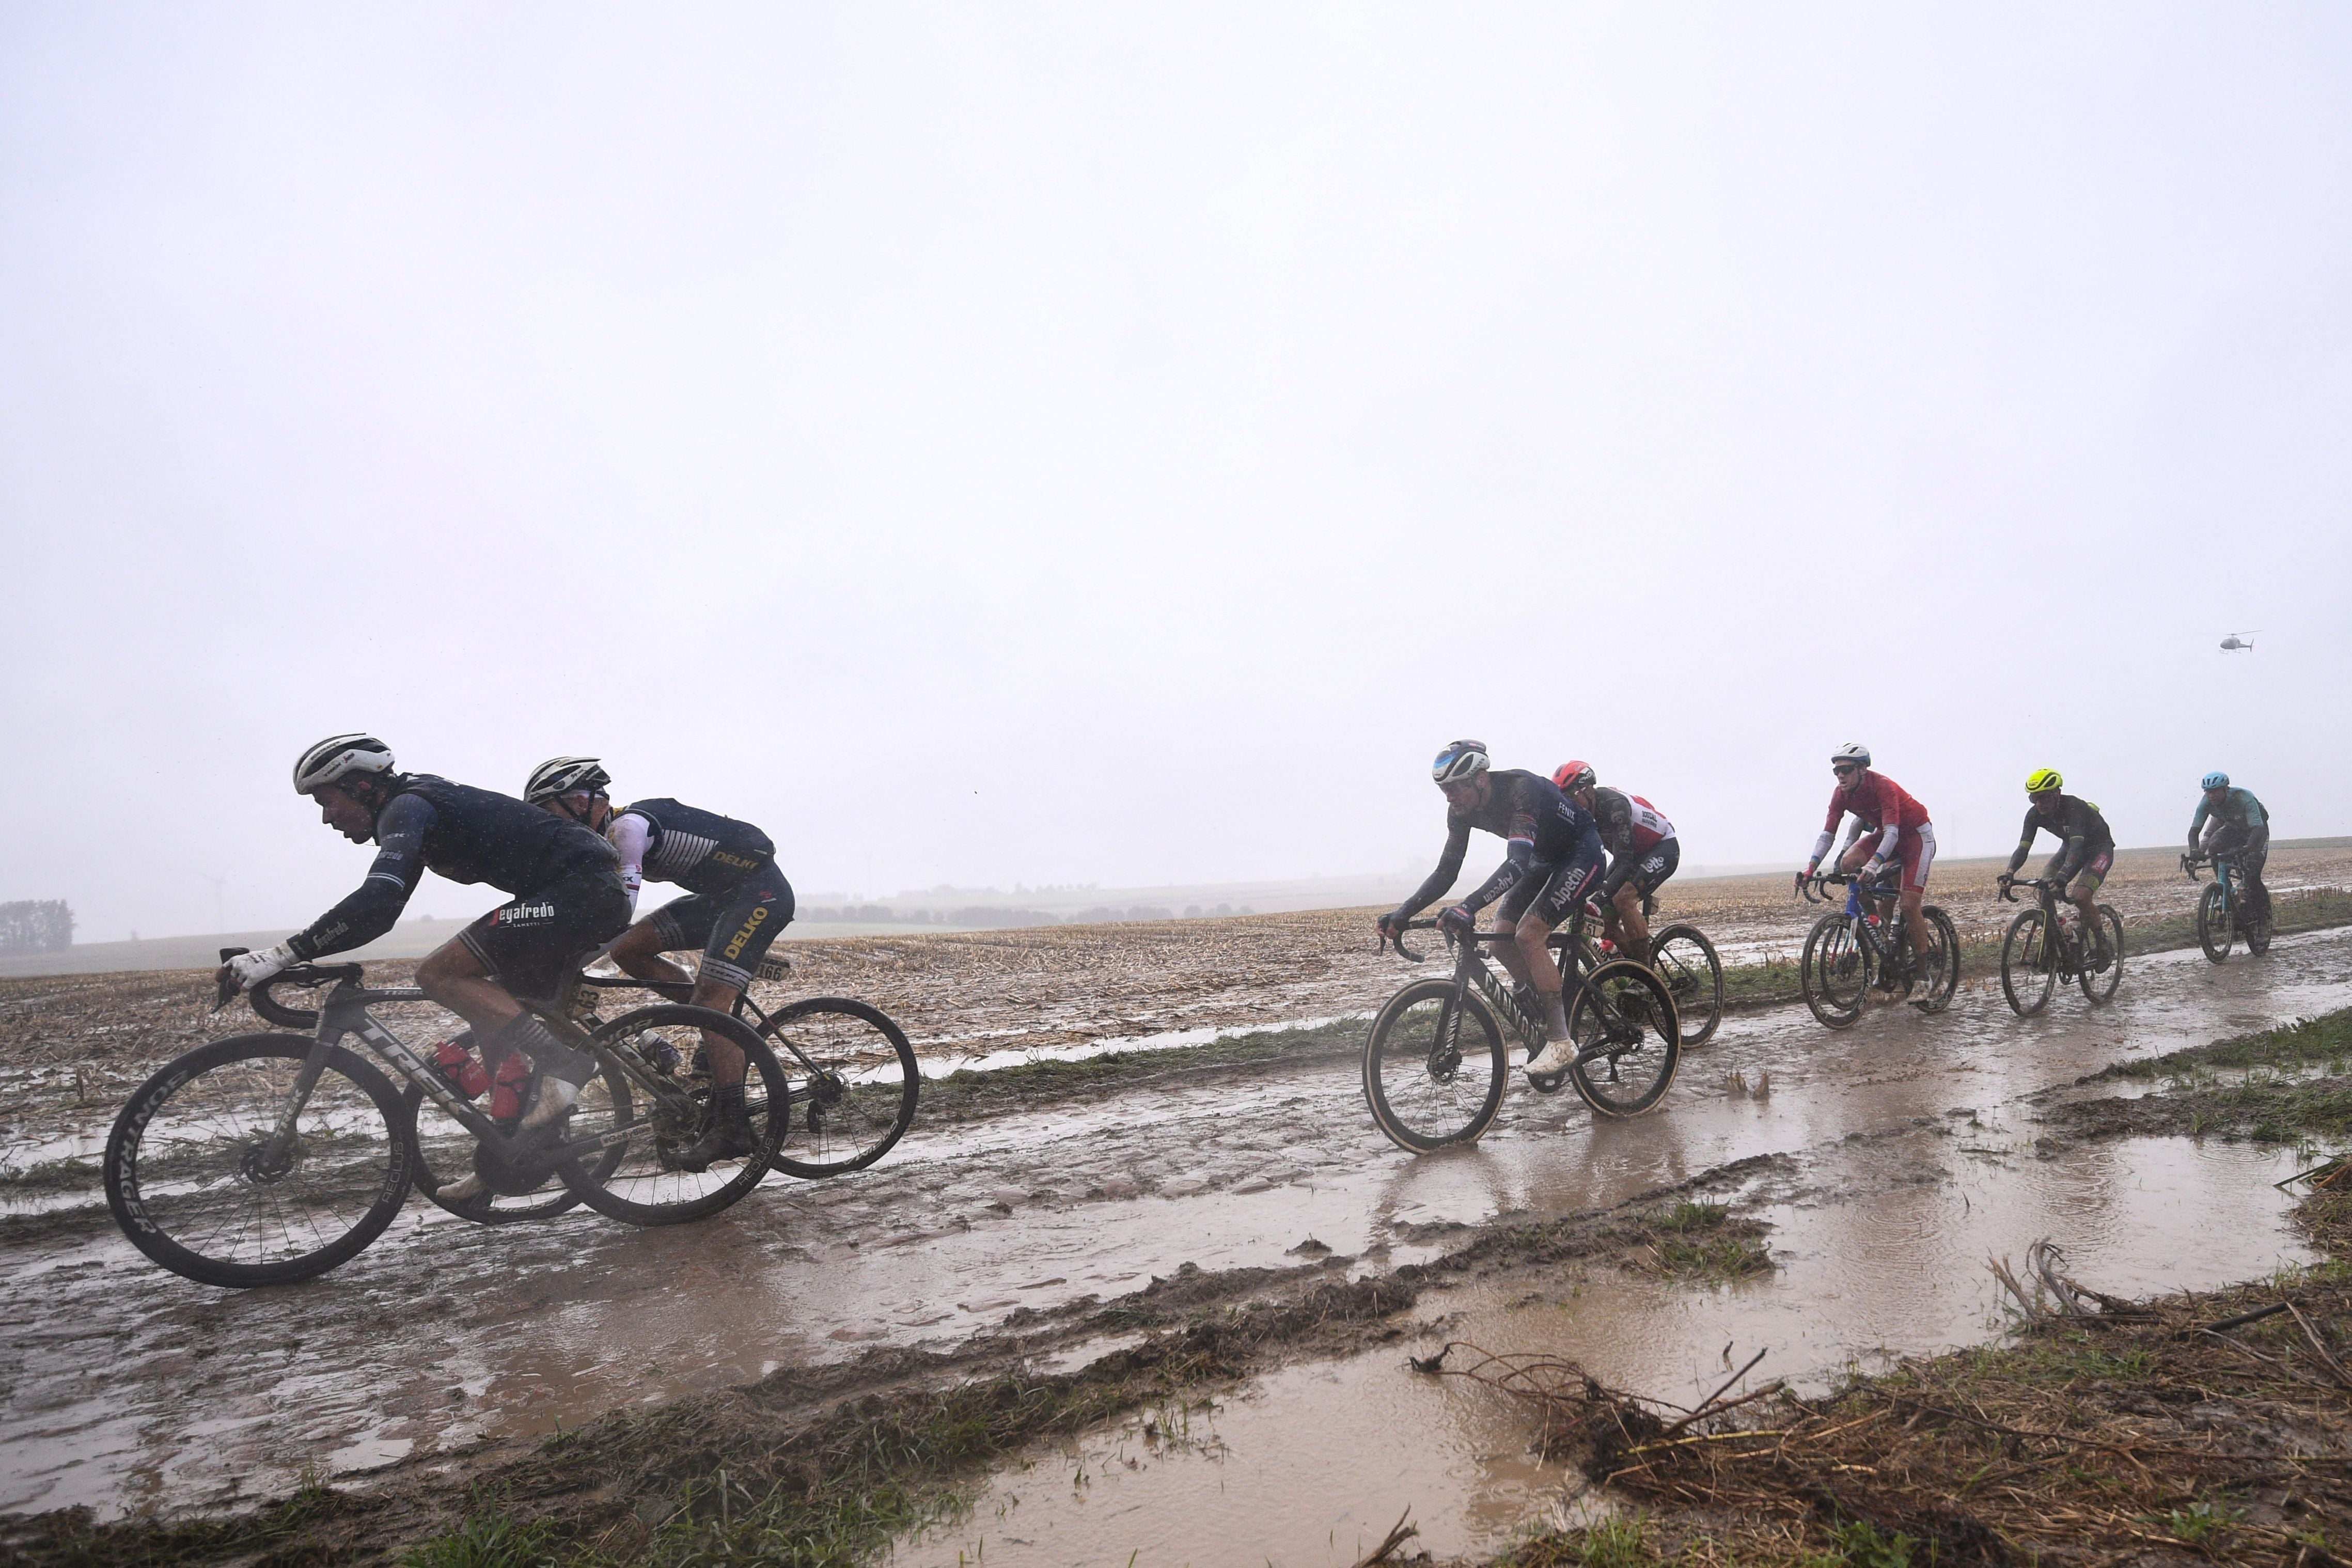 The route will not take riders over the famous Paris-Roubaix cobblestones